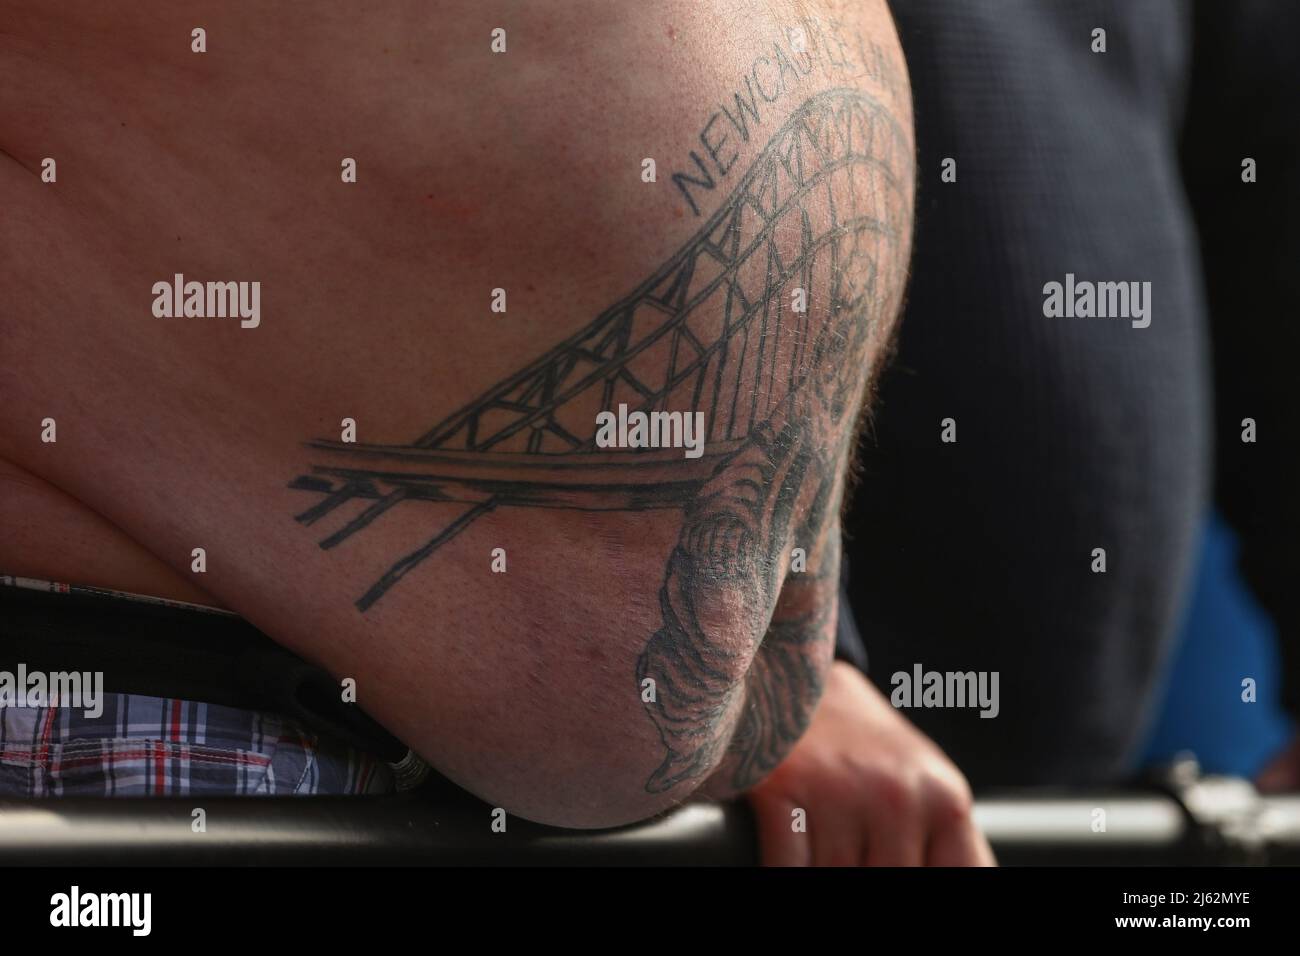 Newcastle United tattoo is seen on a fans stomach - Norwich City v Newcastle  United, Premier League, Carrow Road, Norwich, UK - 23rd April 2022  Editorial Use Only - DataCo restrictions apply Stock Photo - Alamy